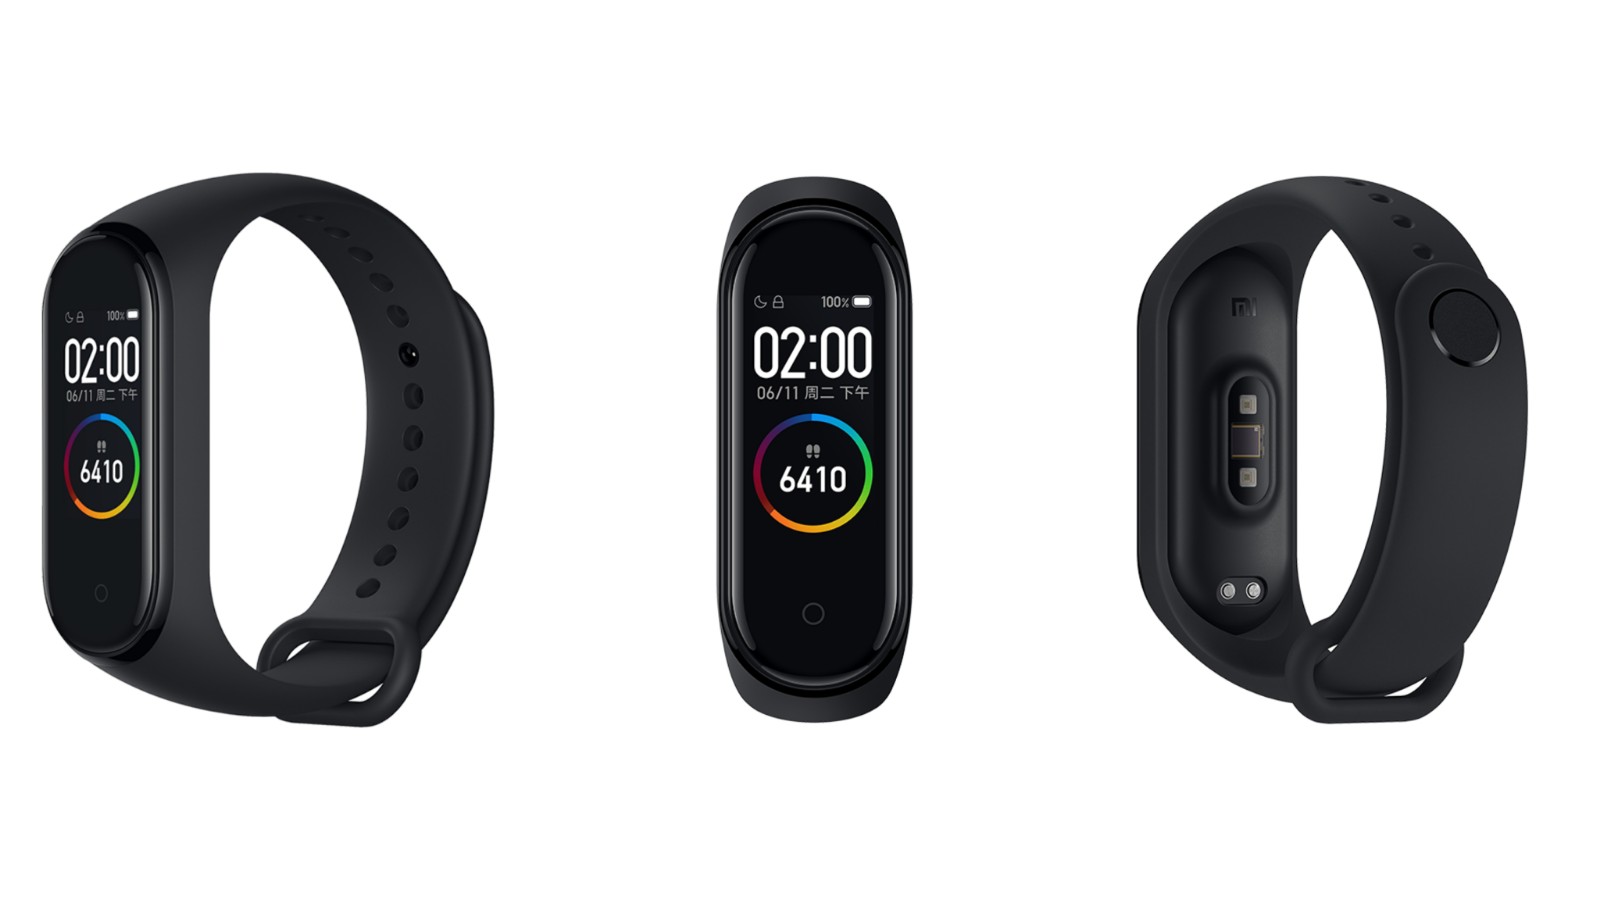 Xiaomi Mi Band 4 expected to debut in India on 17 September at Rs